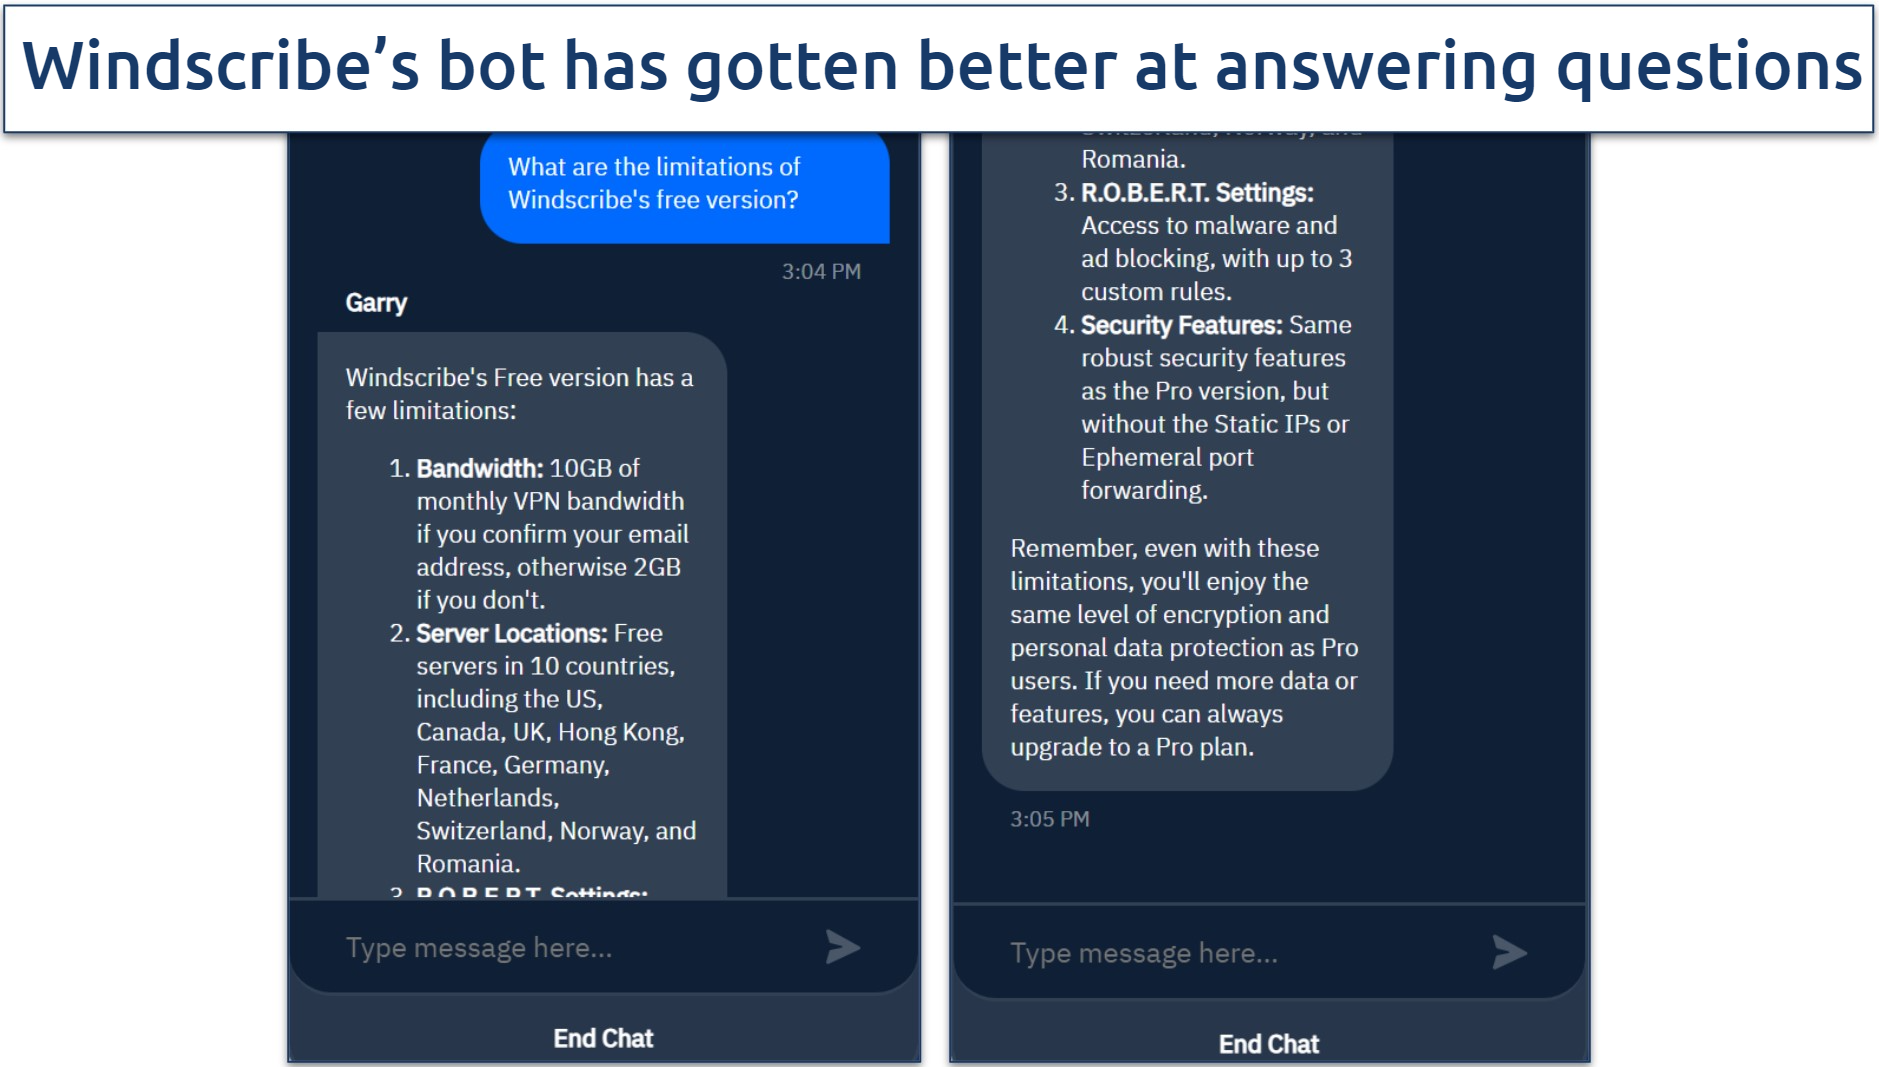 Screenshot of a live chat with Windscribe's bot Garry where I asked for the limitations of its free app